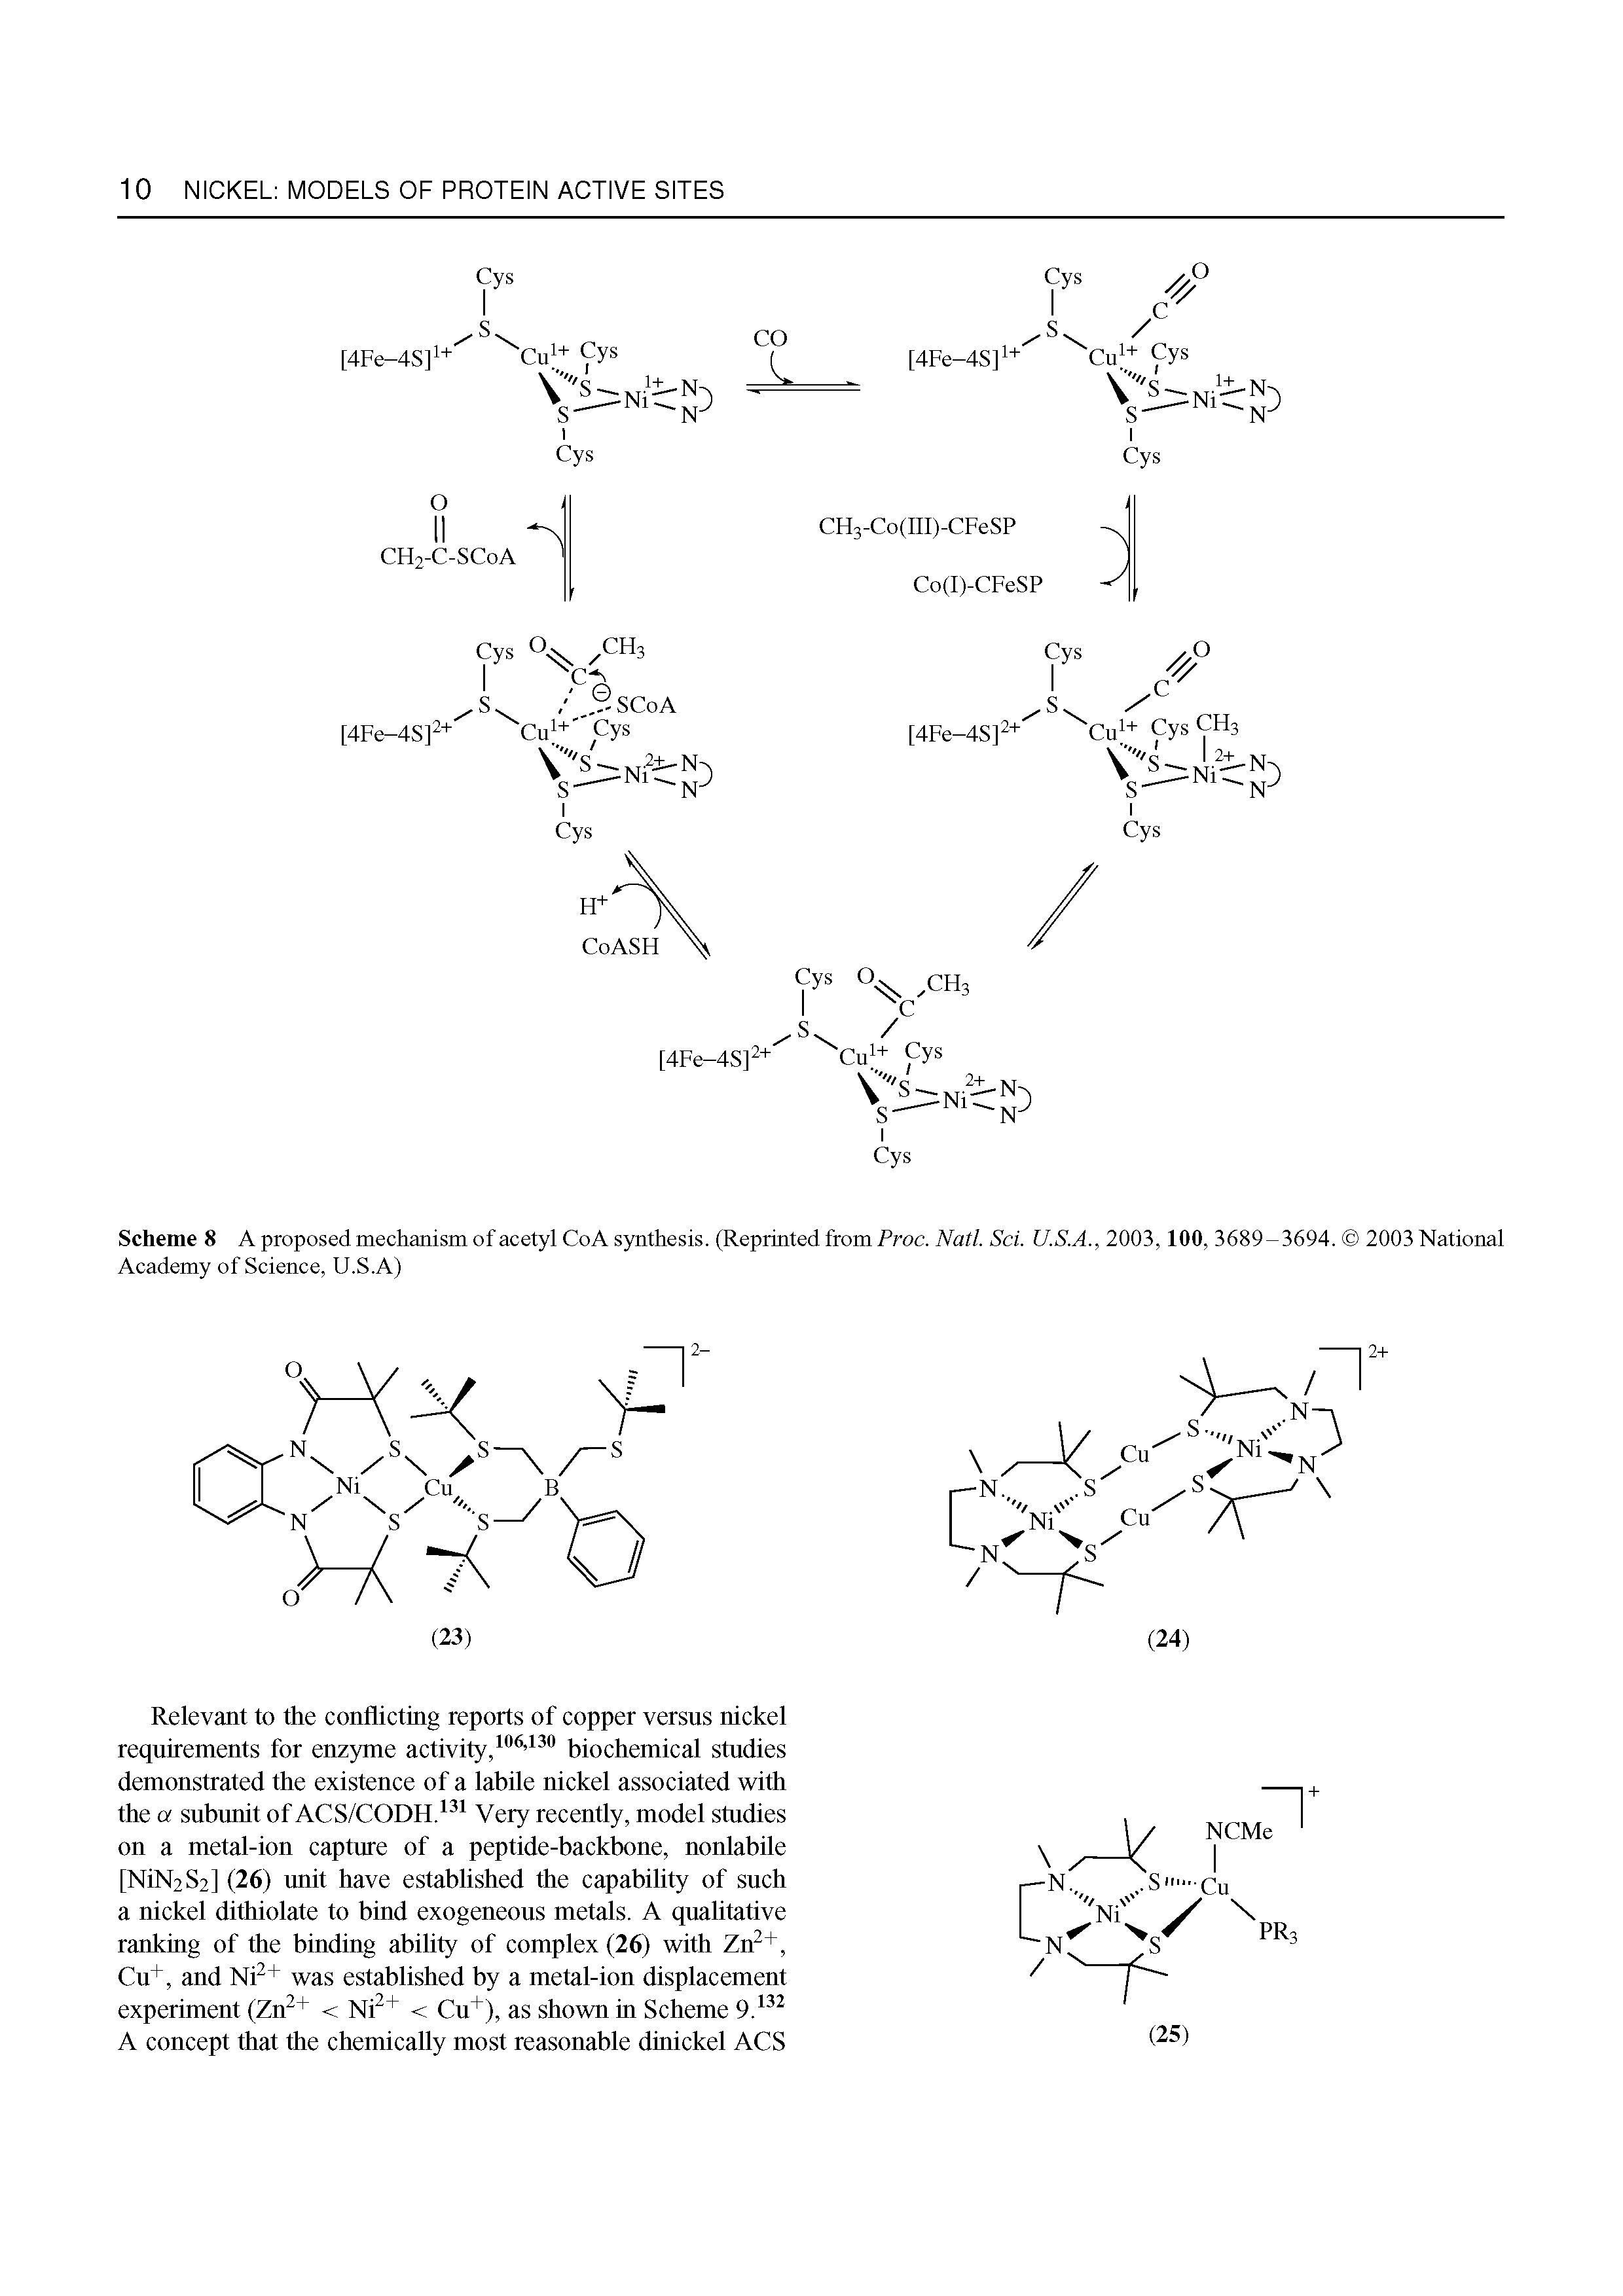 Scheme 8 A proposed mechanism of acetyl CoA synthesis. (Reprinted from Proc. Natl. Set U.S.A., 2003,100, 3689-3694. 2003 National Academy of Science, U.S.A)...